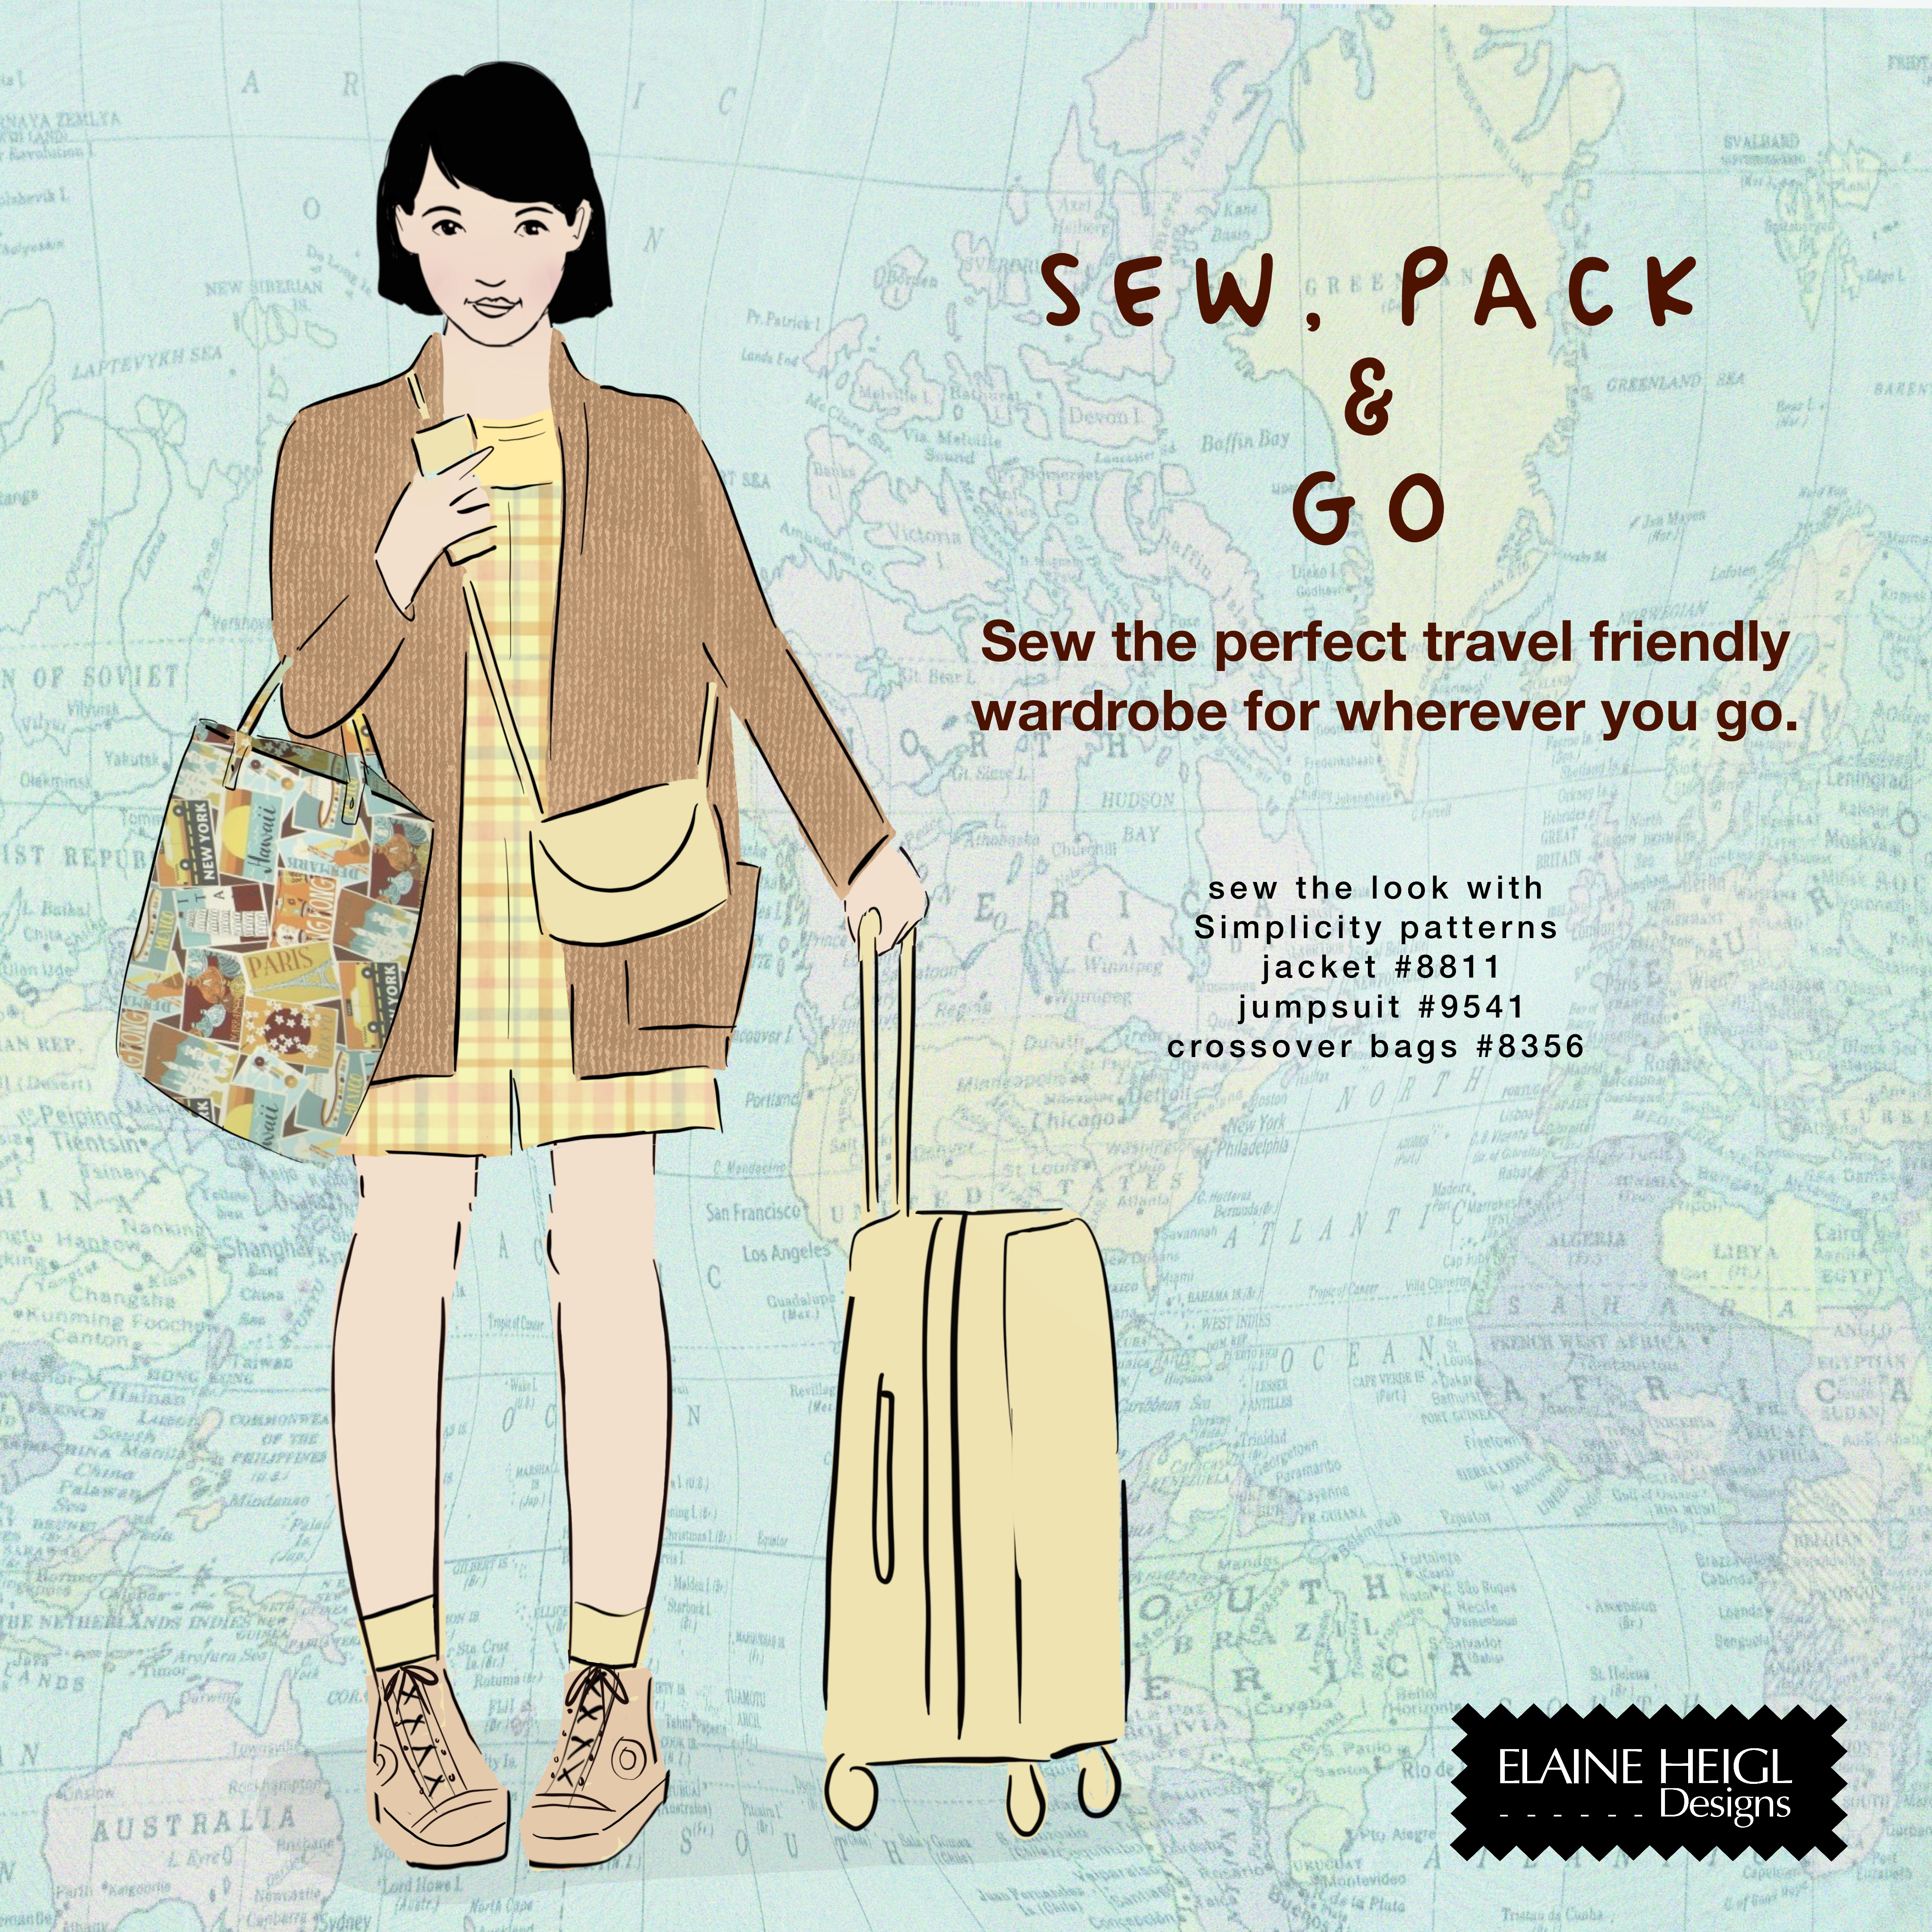 EASY SEW, EASY WEAR WARDROBE for travel and everyday